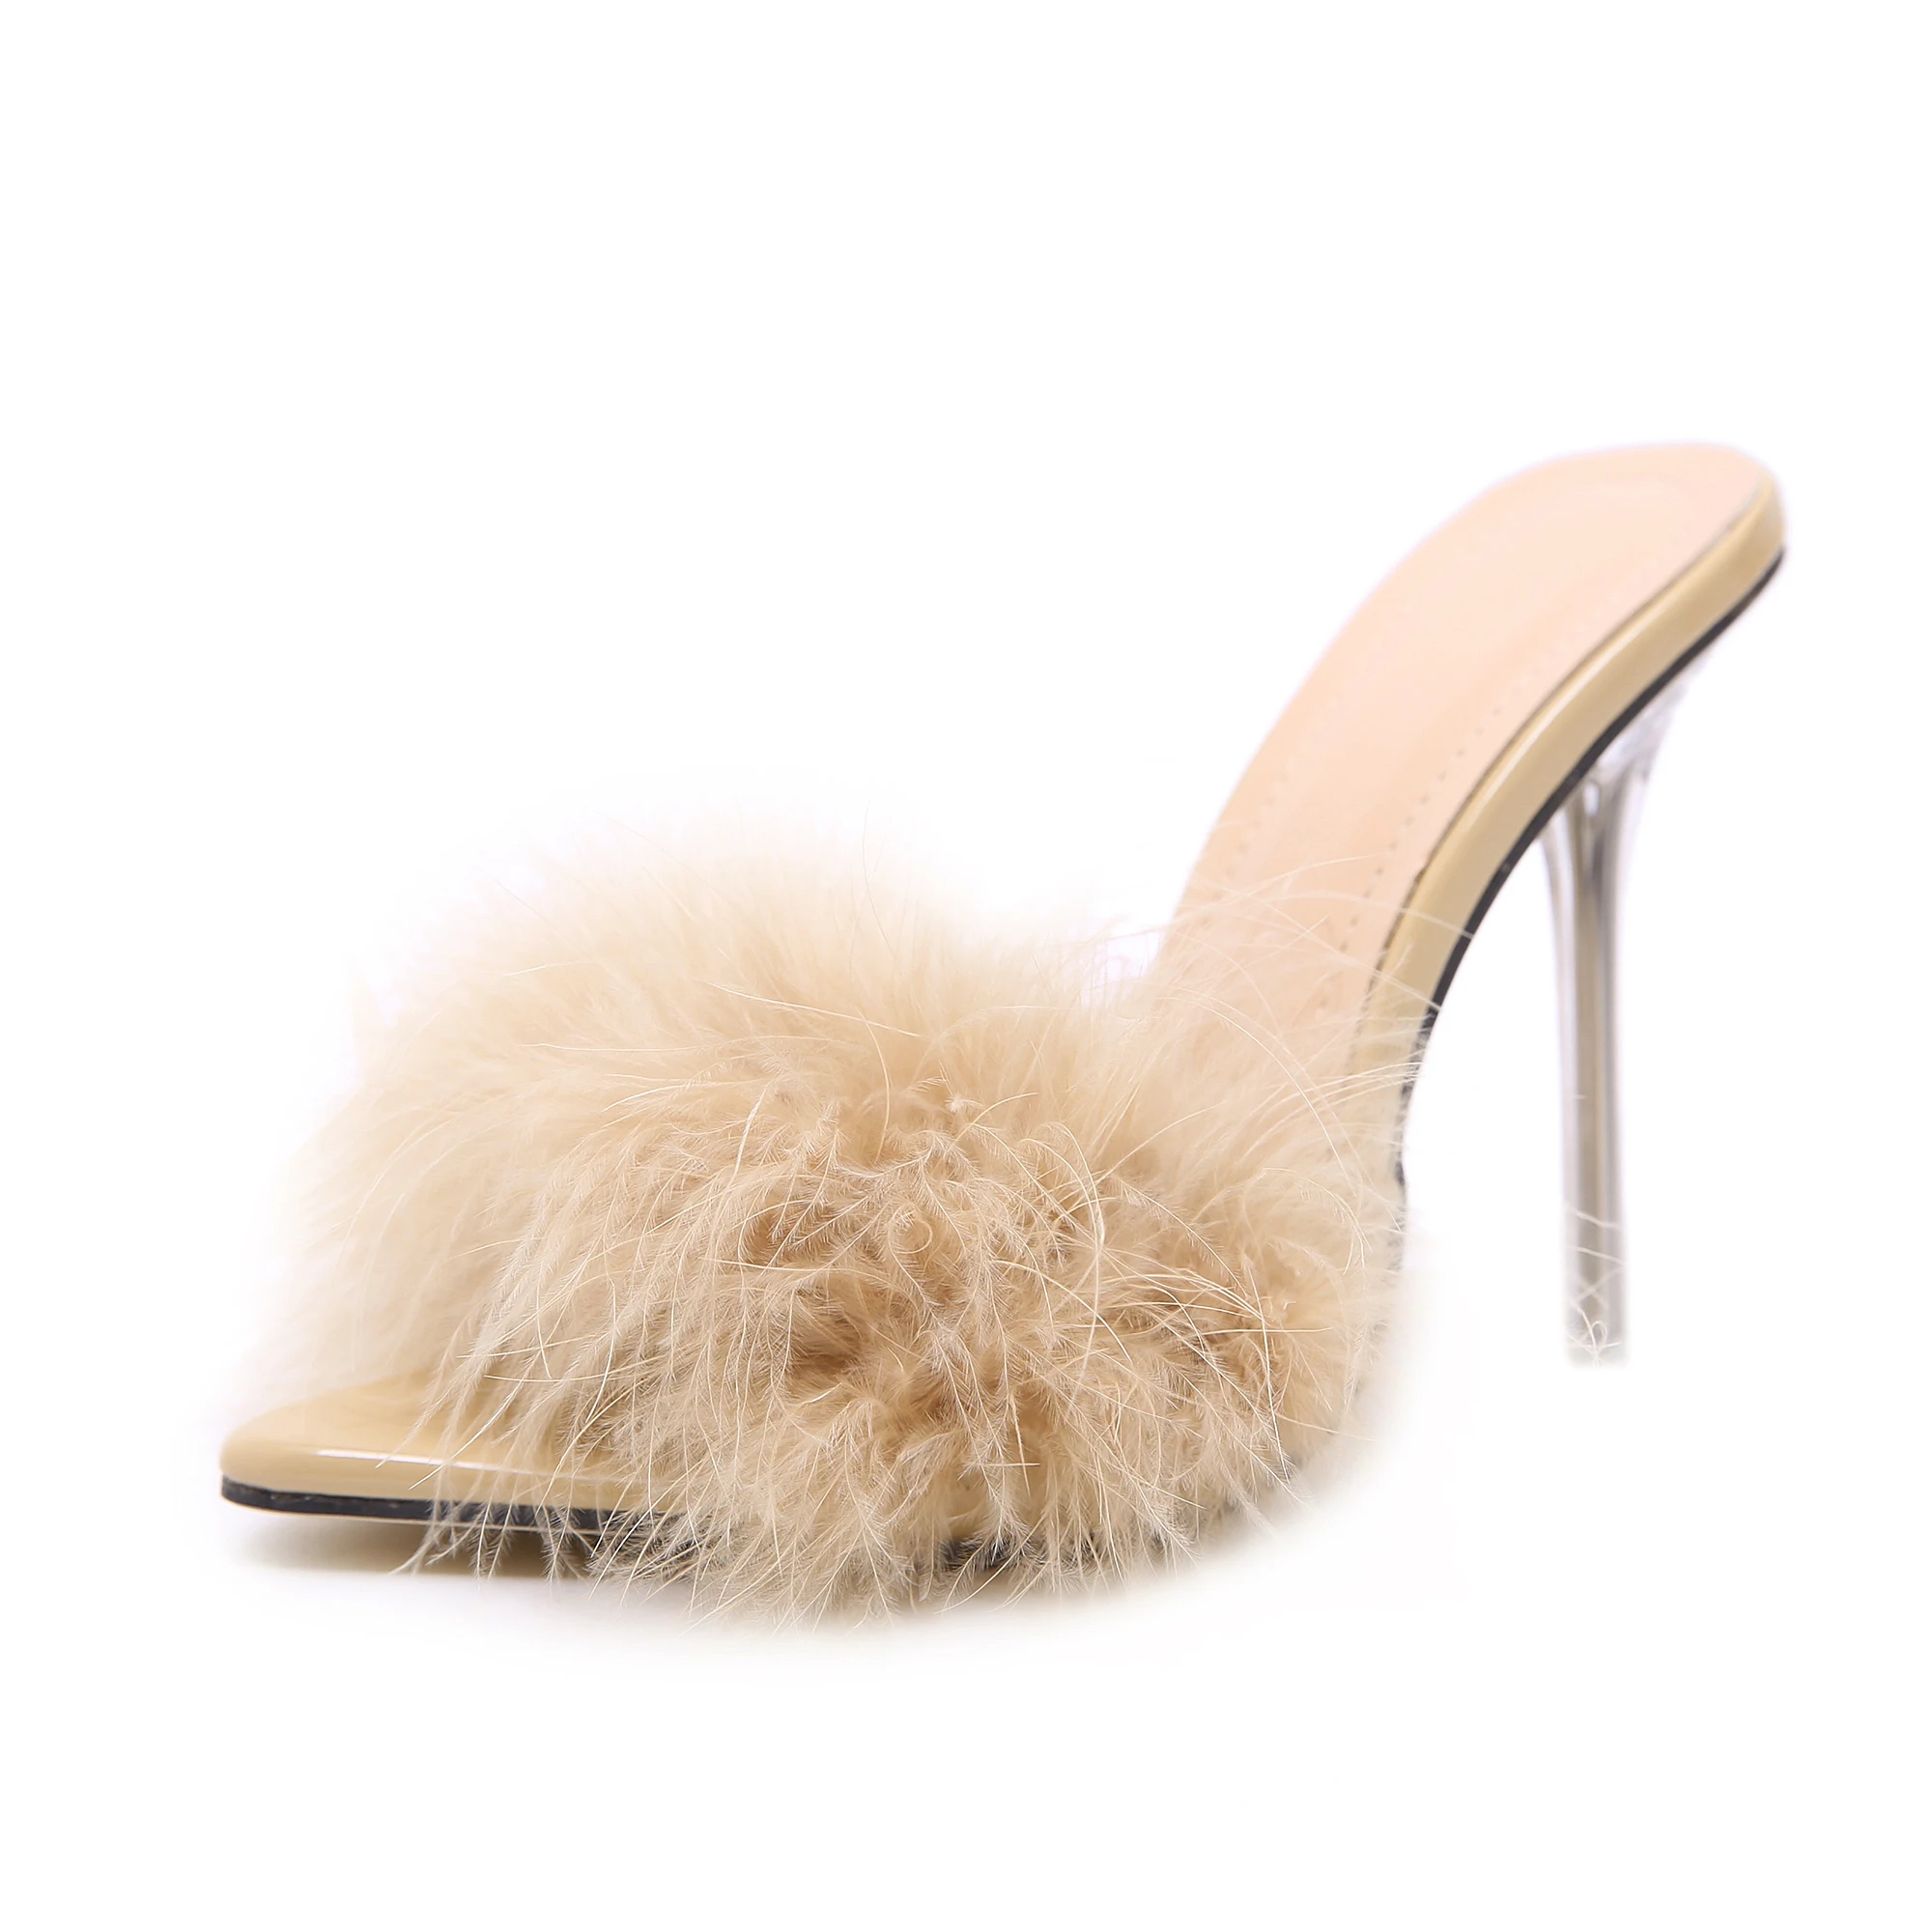 

Scarpe Donna Tacco Alto Piume Slippers 2021 Stiletto Feather Mules Sexy Sandals Fur High Heels for Ladies, White, yellow, black, rosy, pink, apricot